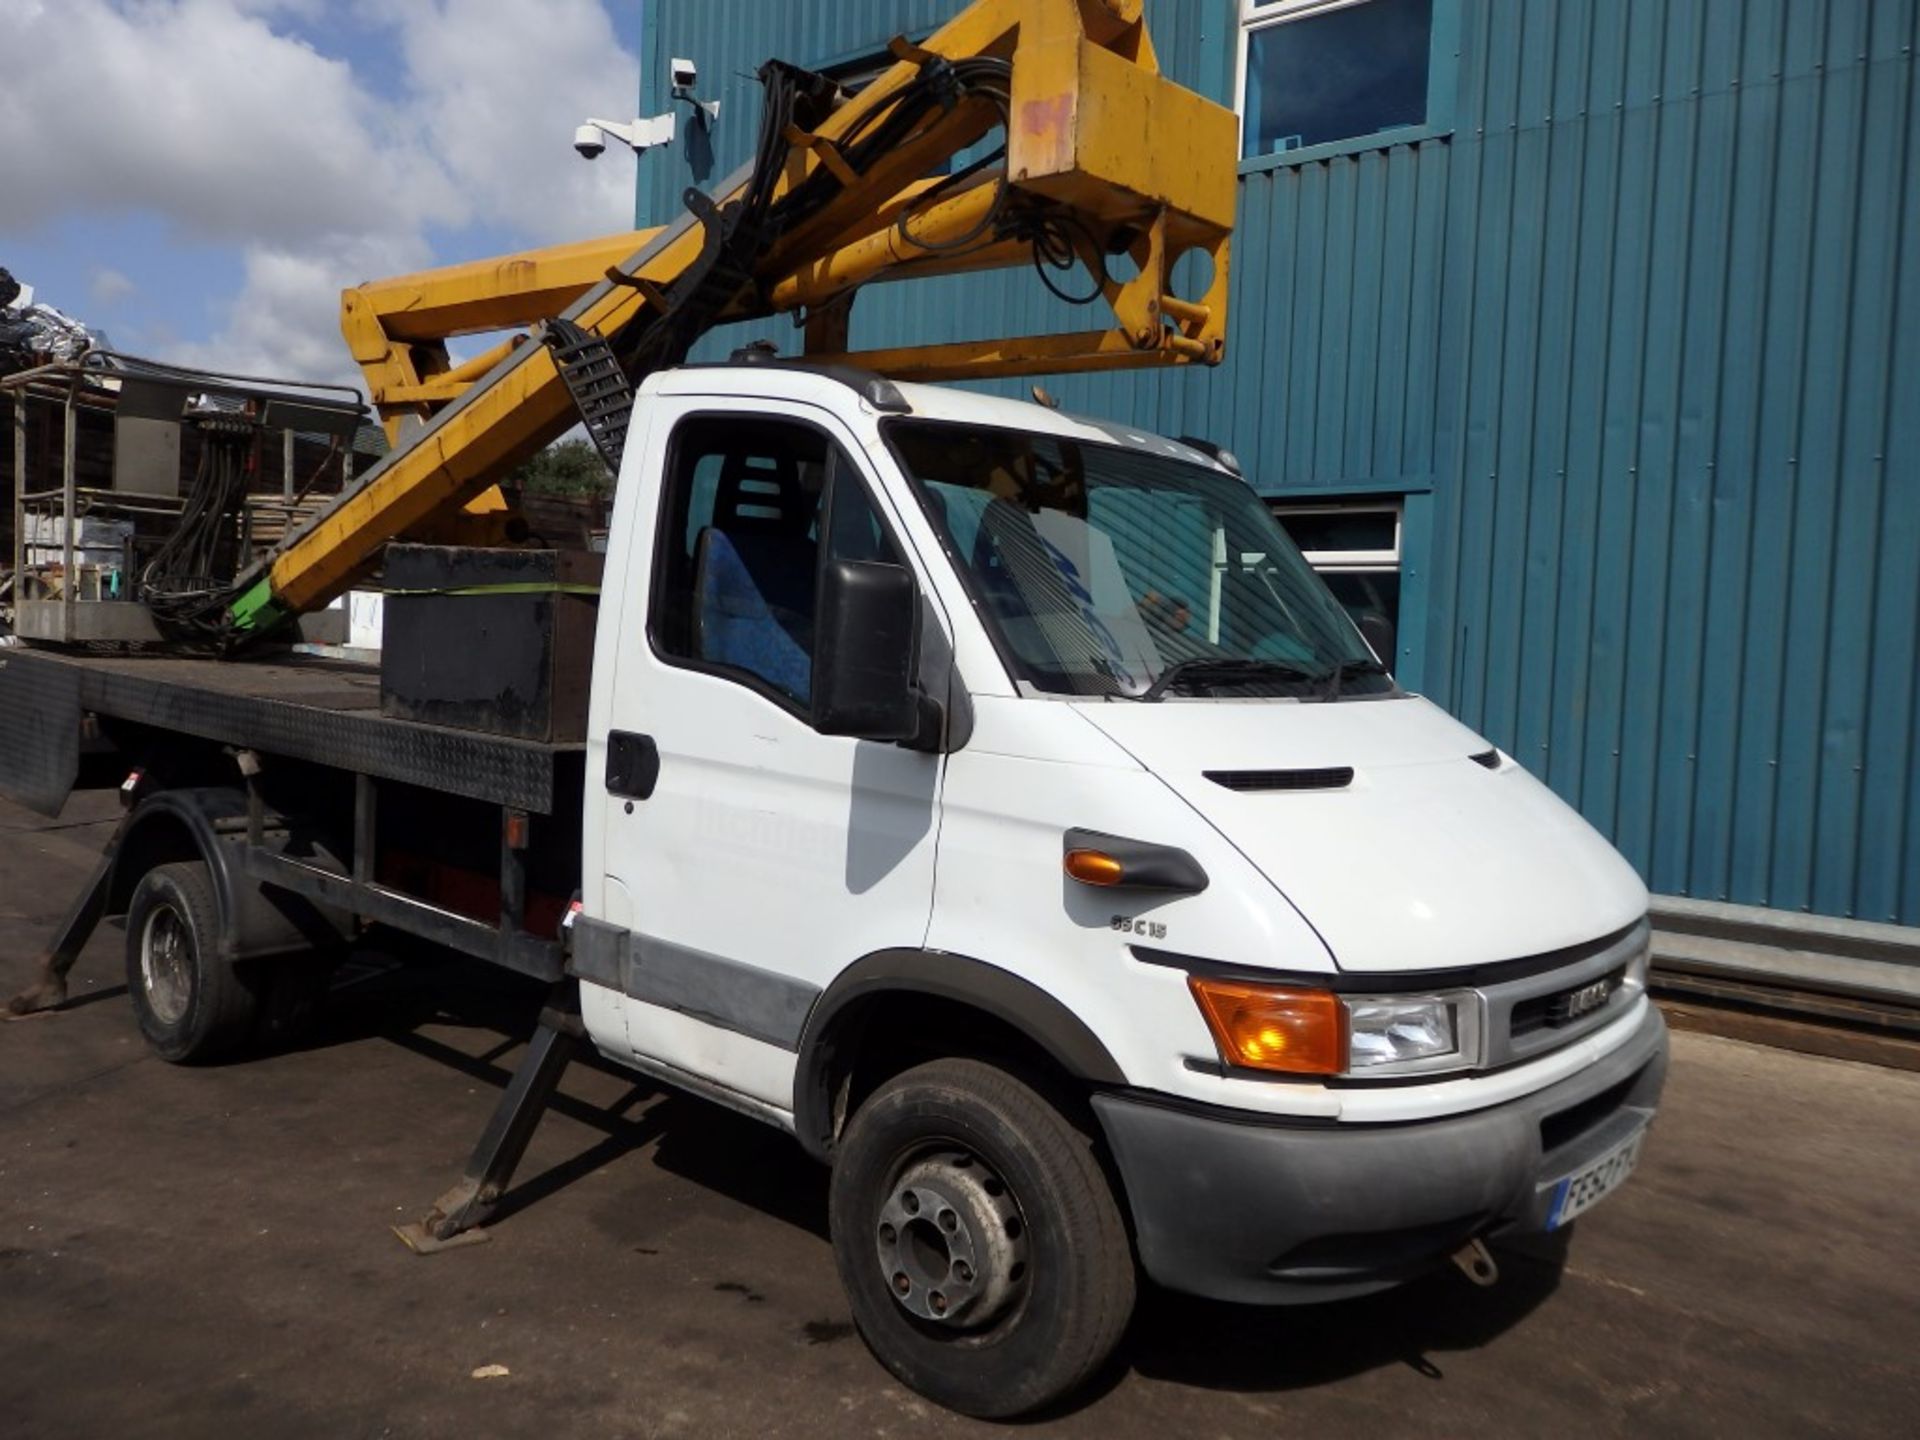 1 x 2002 (52 Reg) White Iveco Transit 65C15 Crane / Cherry Picker With Outstanding Reach and 2 Man - Image 49 of 71